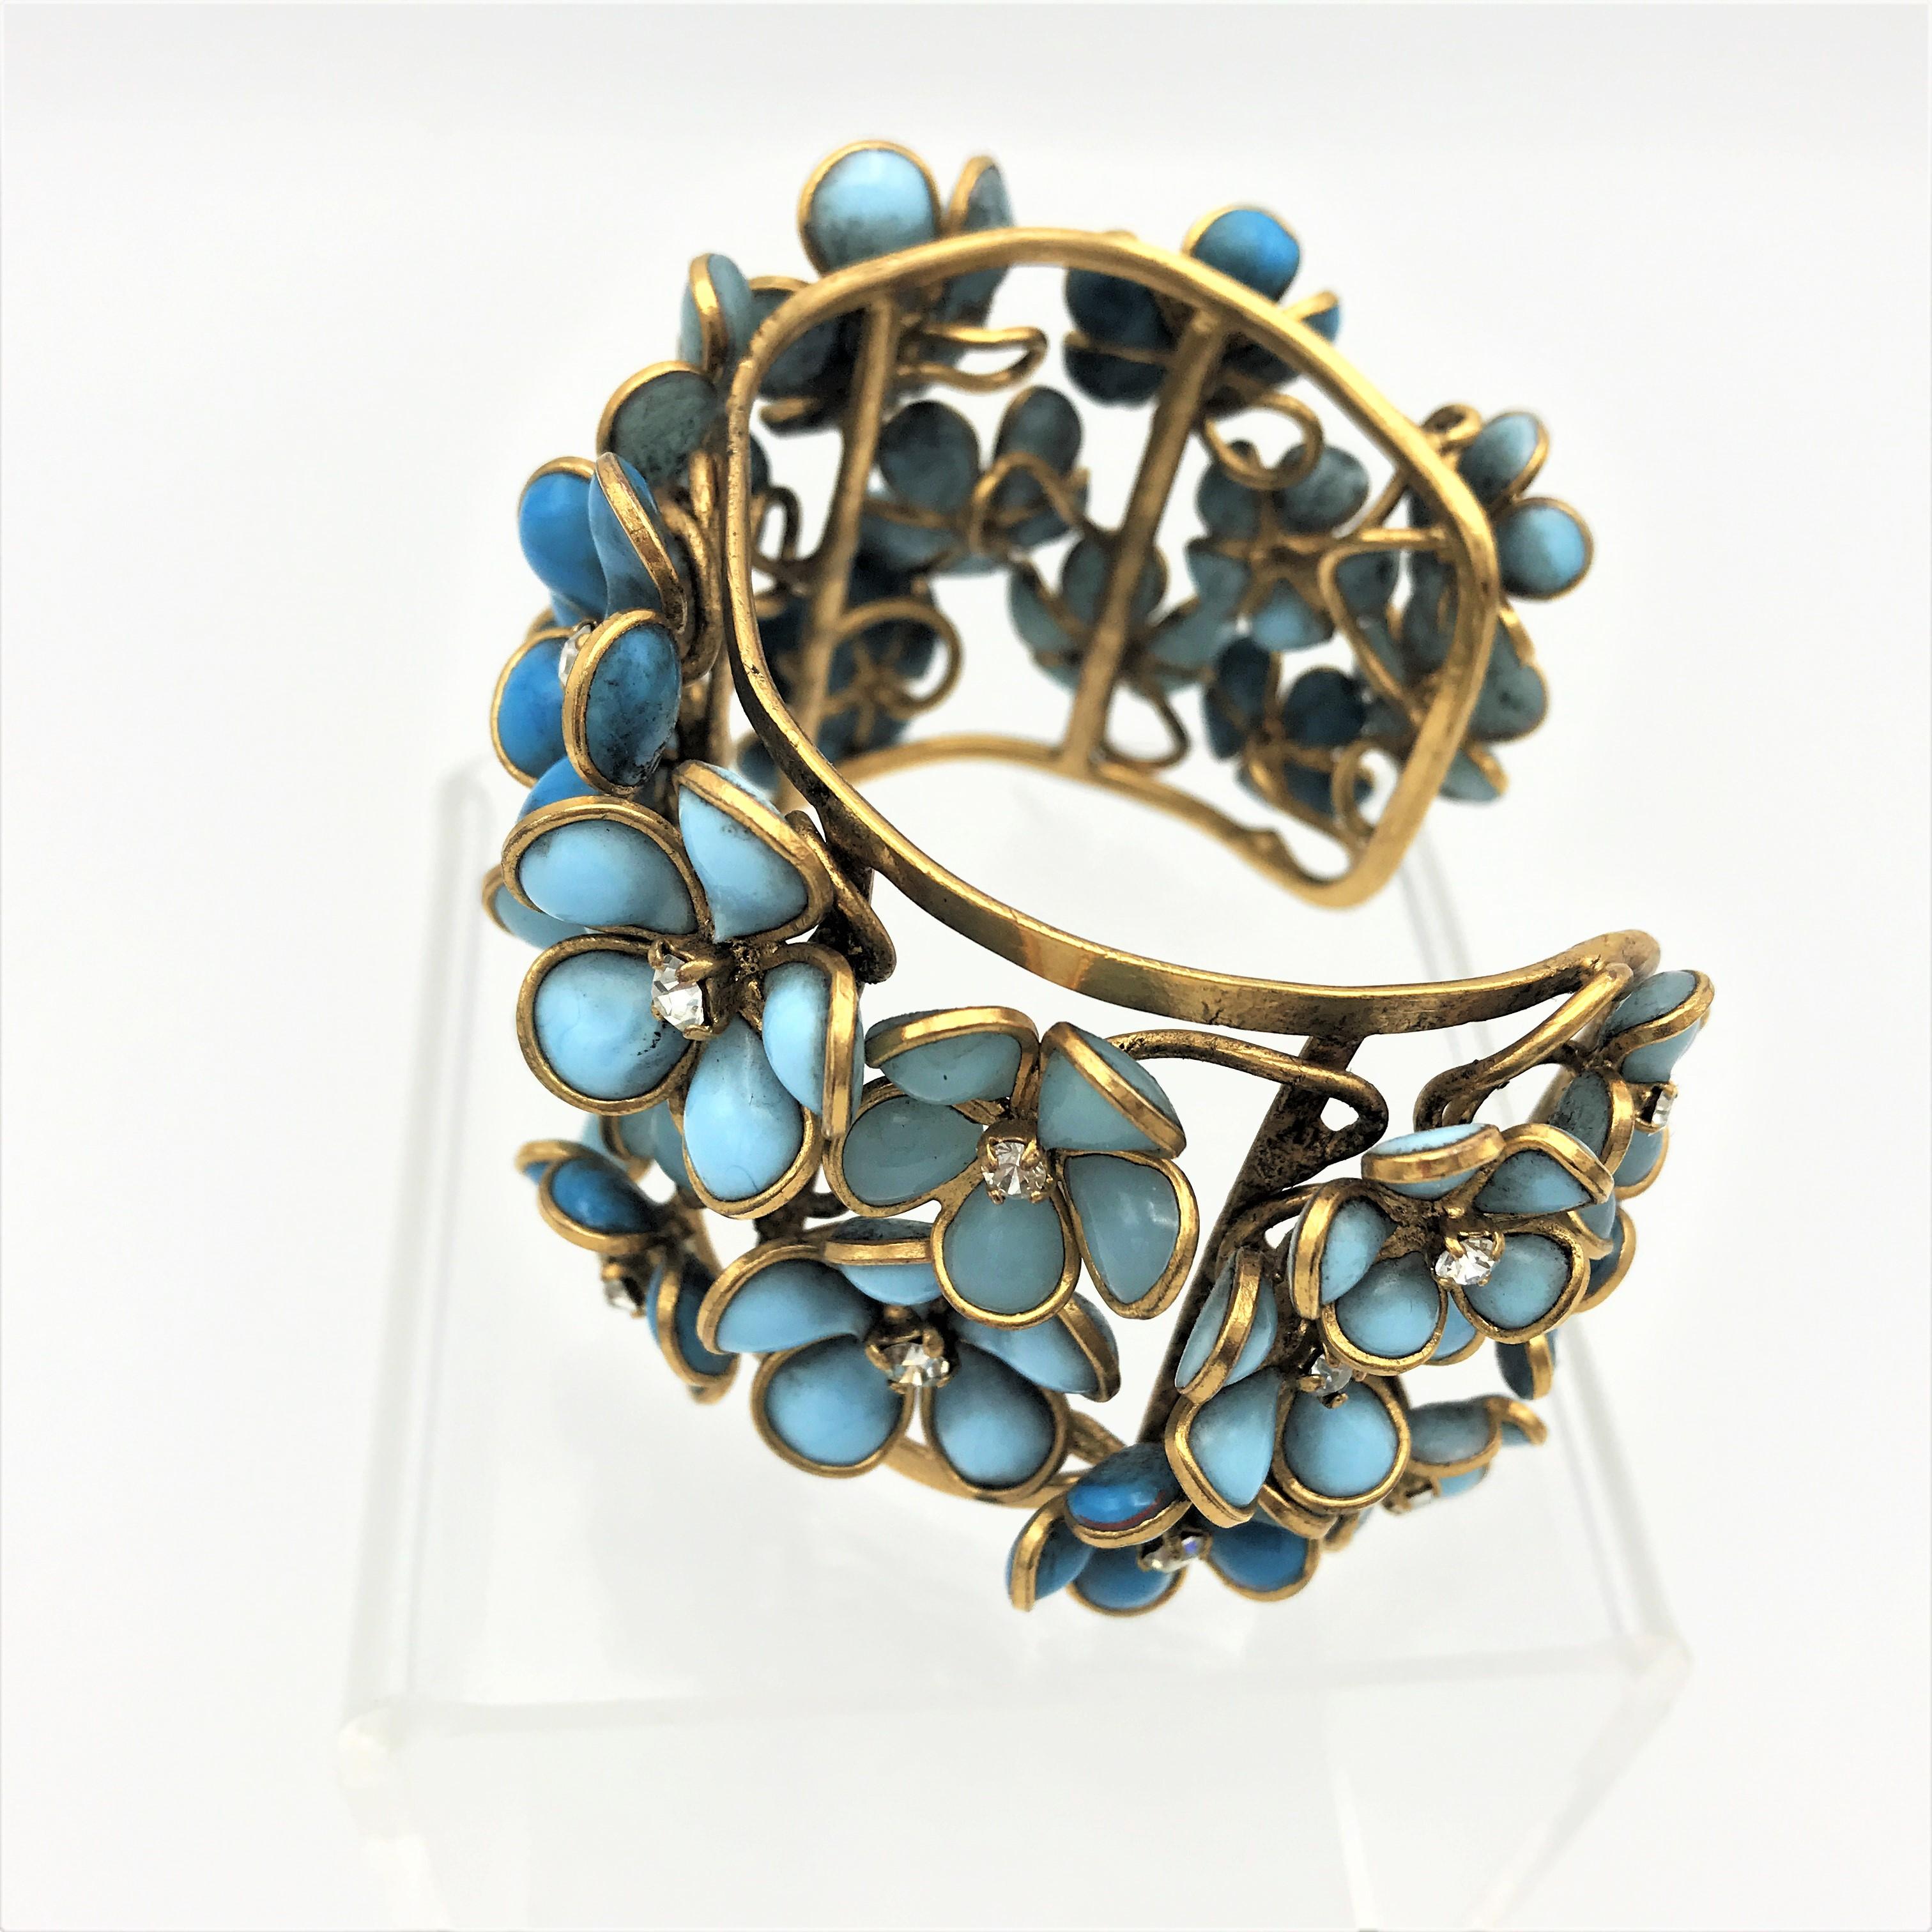 Romantic Flower open bracelet with many Gripoix flowers and rhinestones, gold plated 